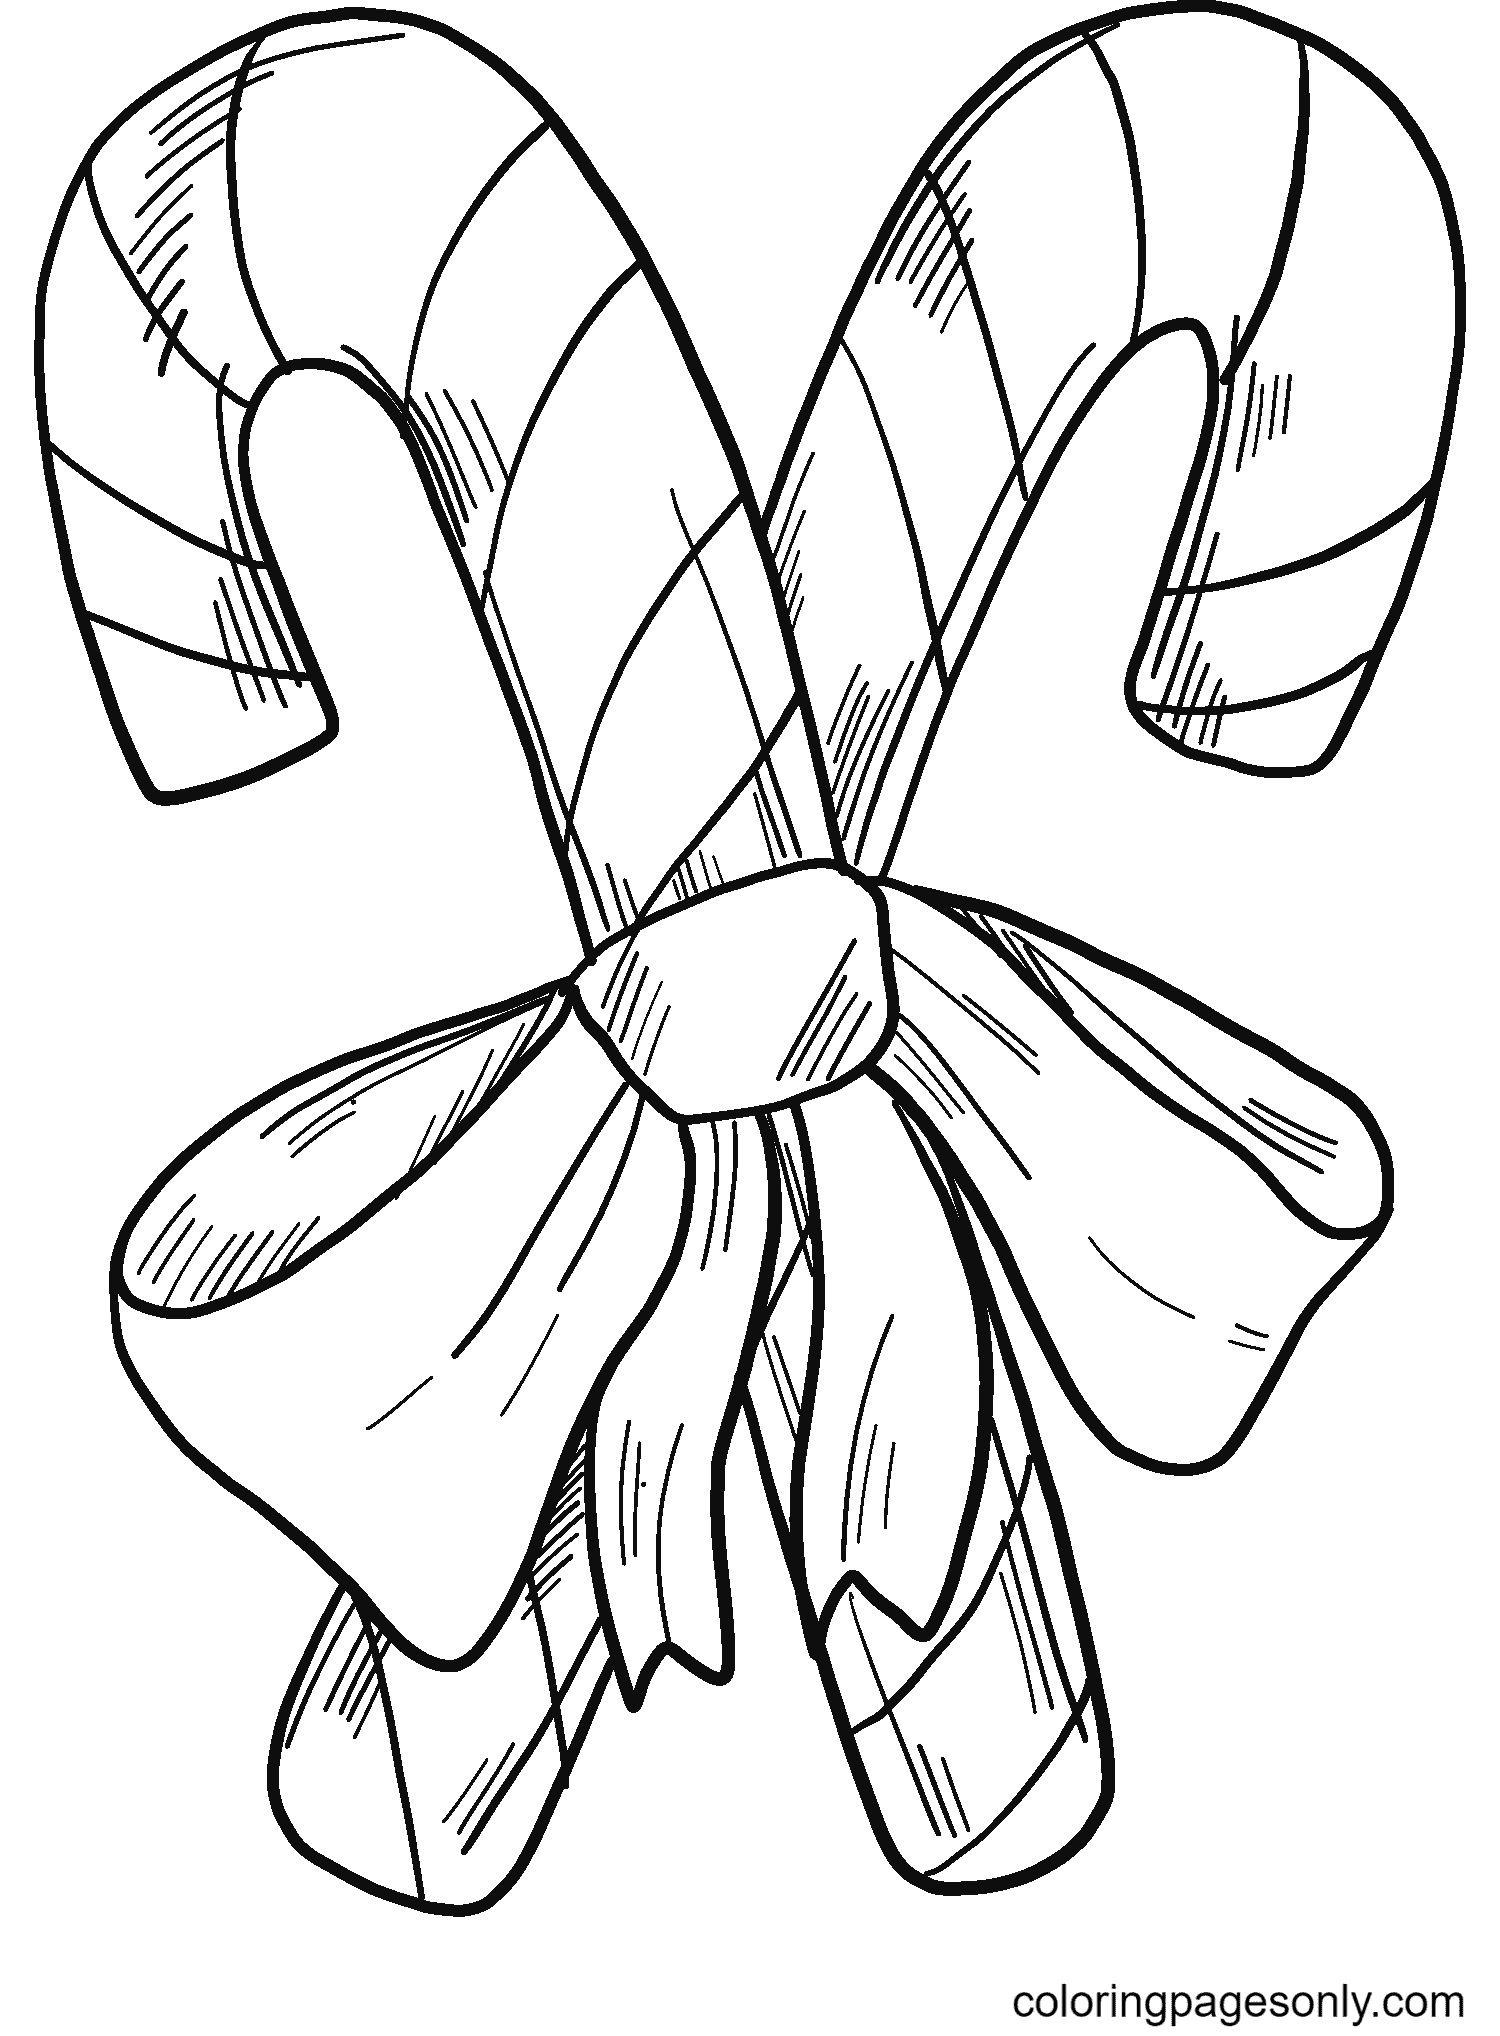 Candy Canes Free Coloring Pages